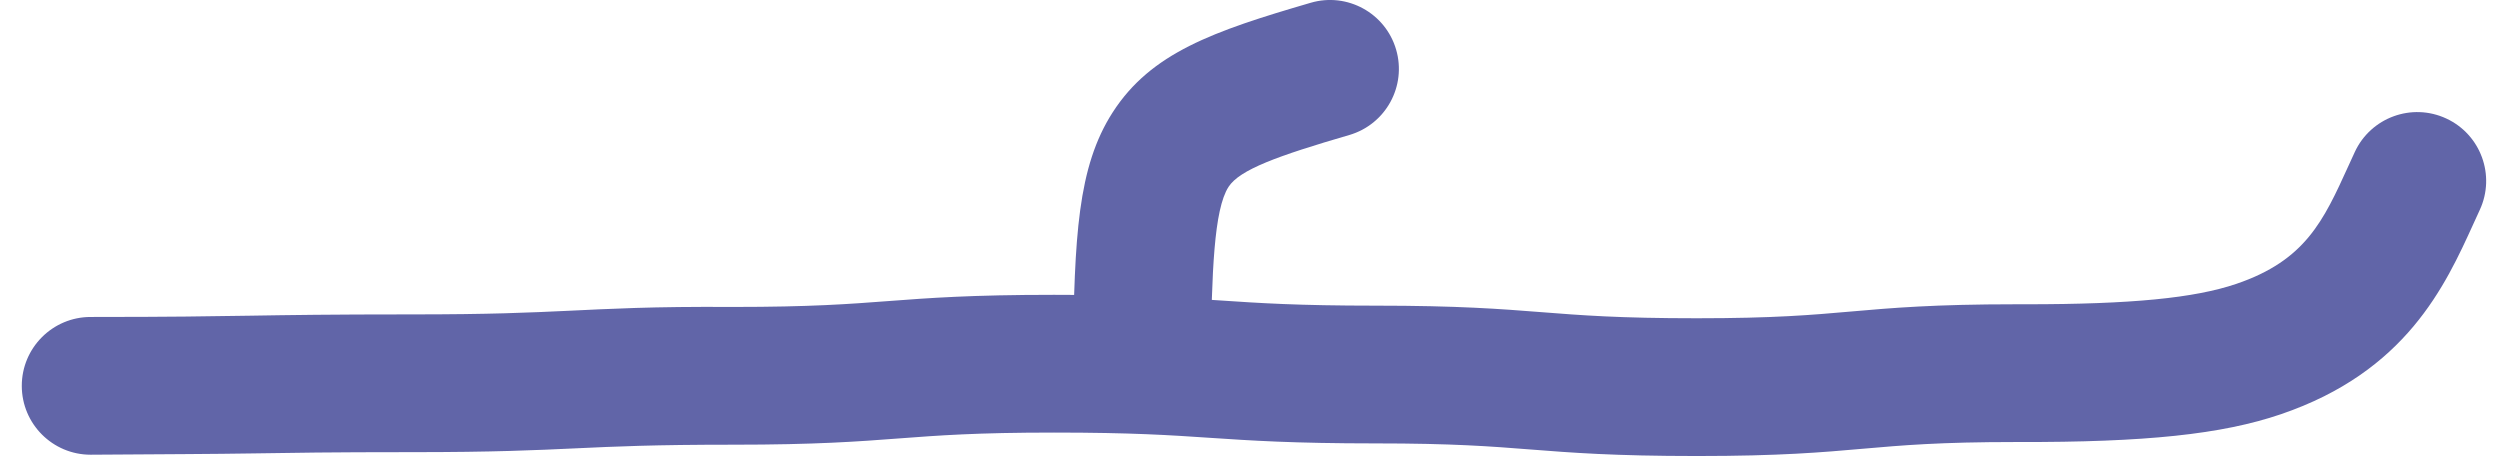 lilac mini skis Illustration in PNG, SVG